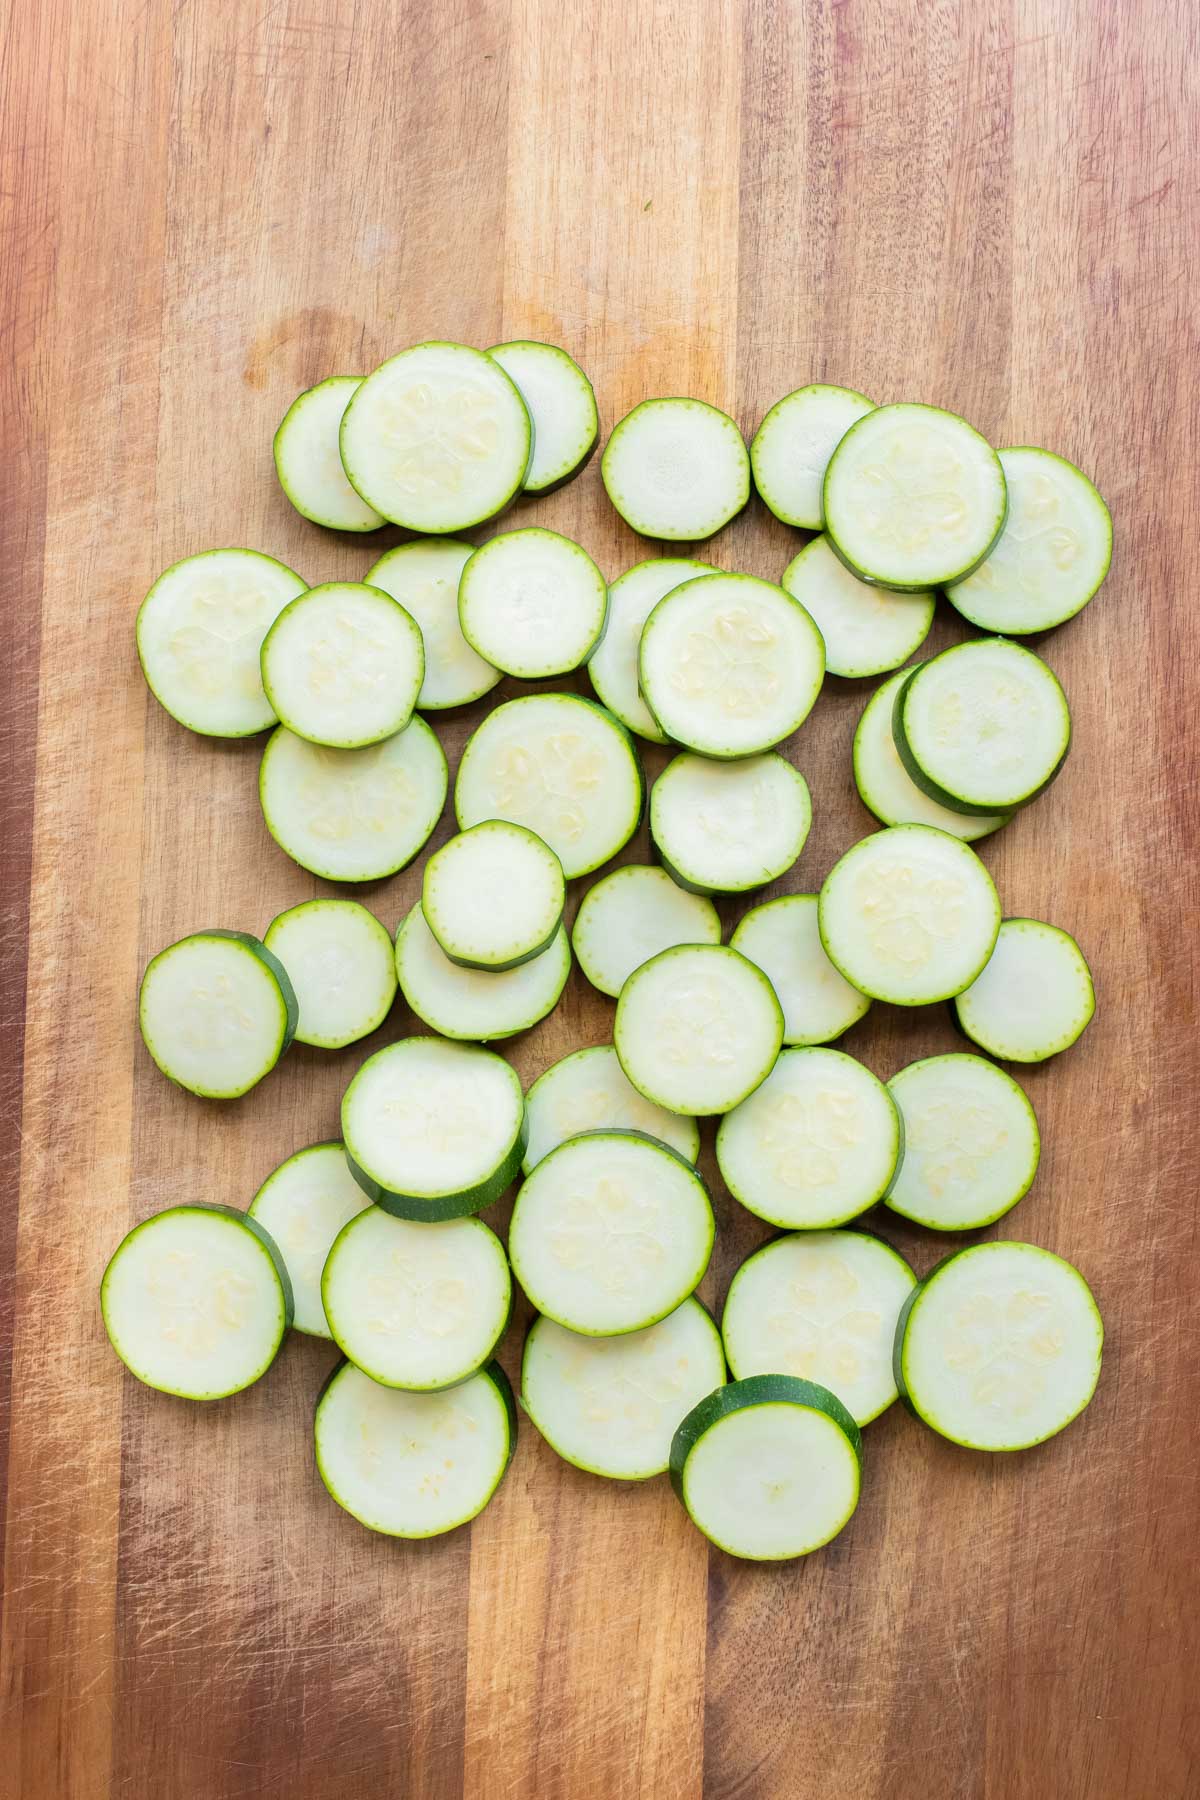 Zucchini slices are laid out flat on the cutting board.